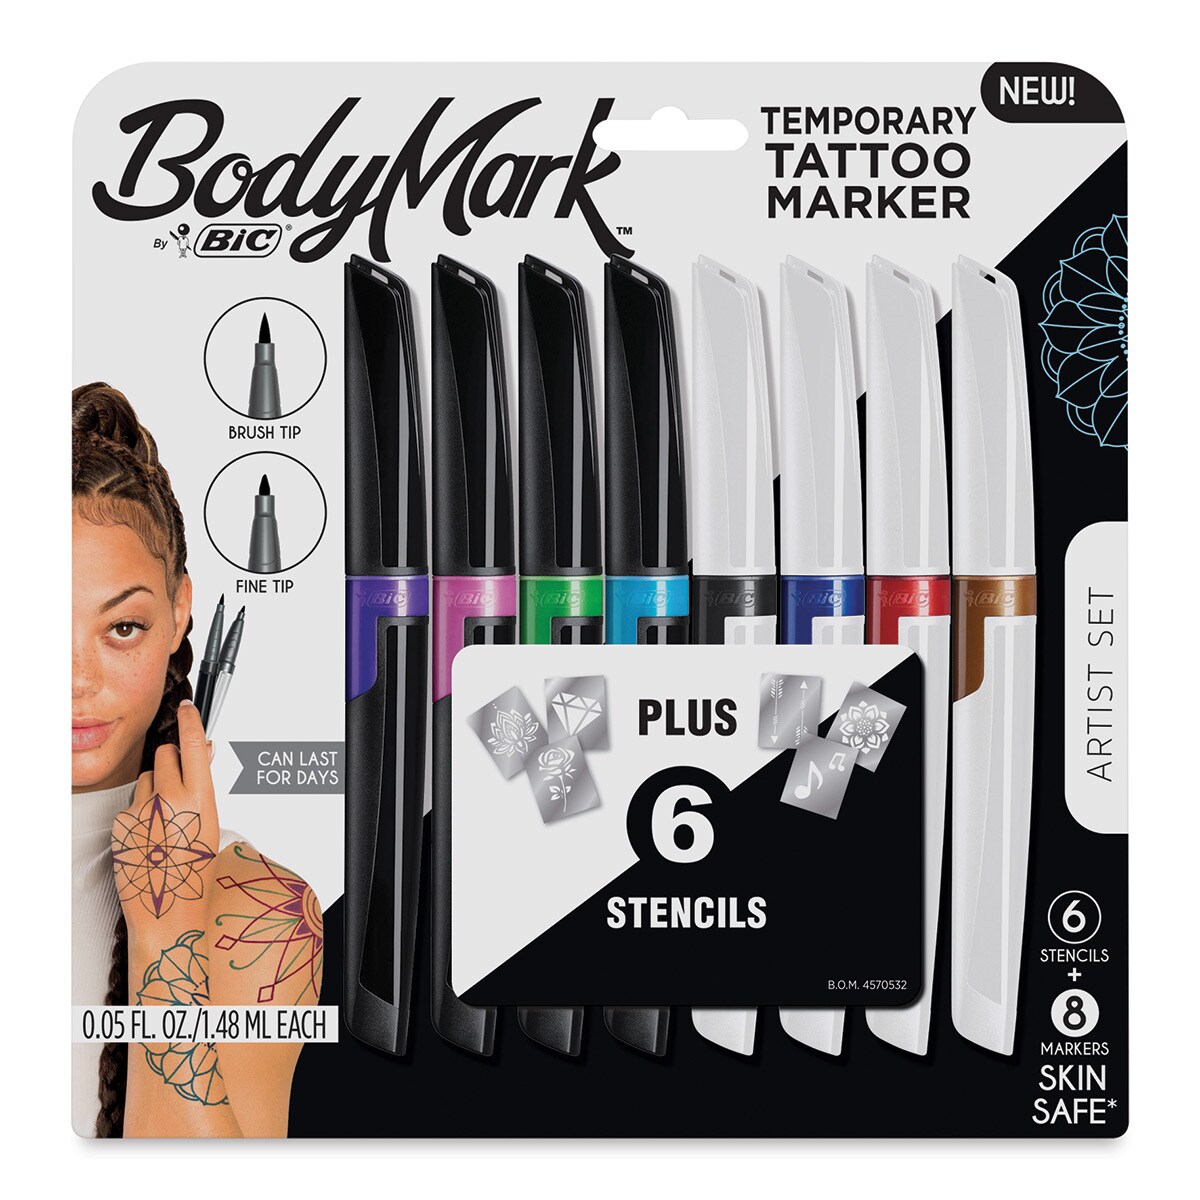 Amazoncom BIC BodyMark Temporary Tattoo Markers for Skin Pride Pack  Flexible Brush Tip 11Count Pack of Assorted Colors SkinSafe Cosmetic  Quality  Beauty  Personal Care